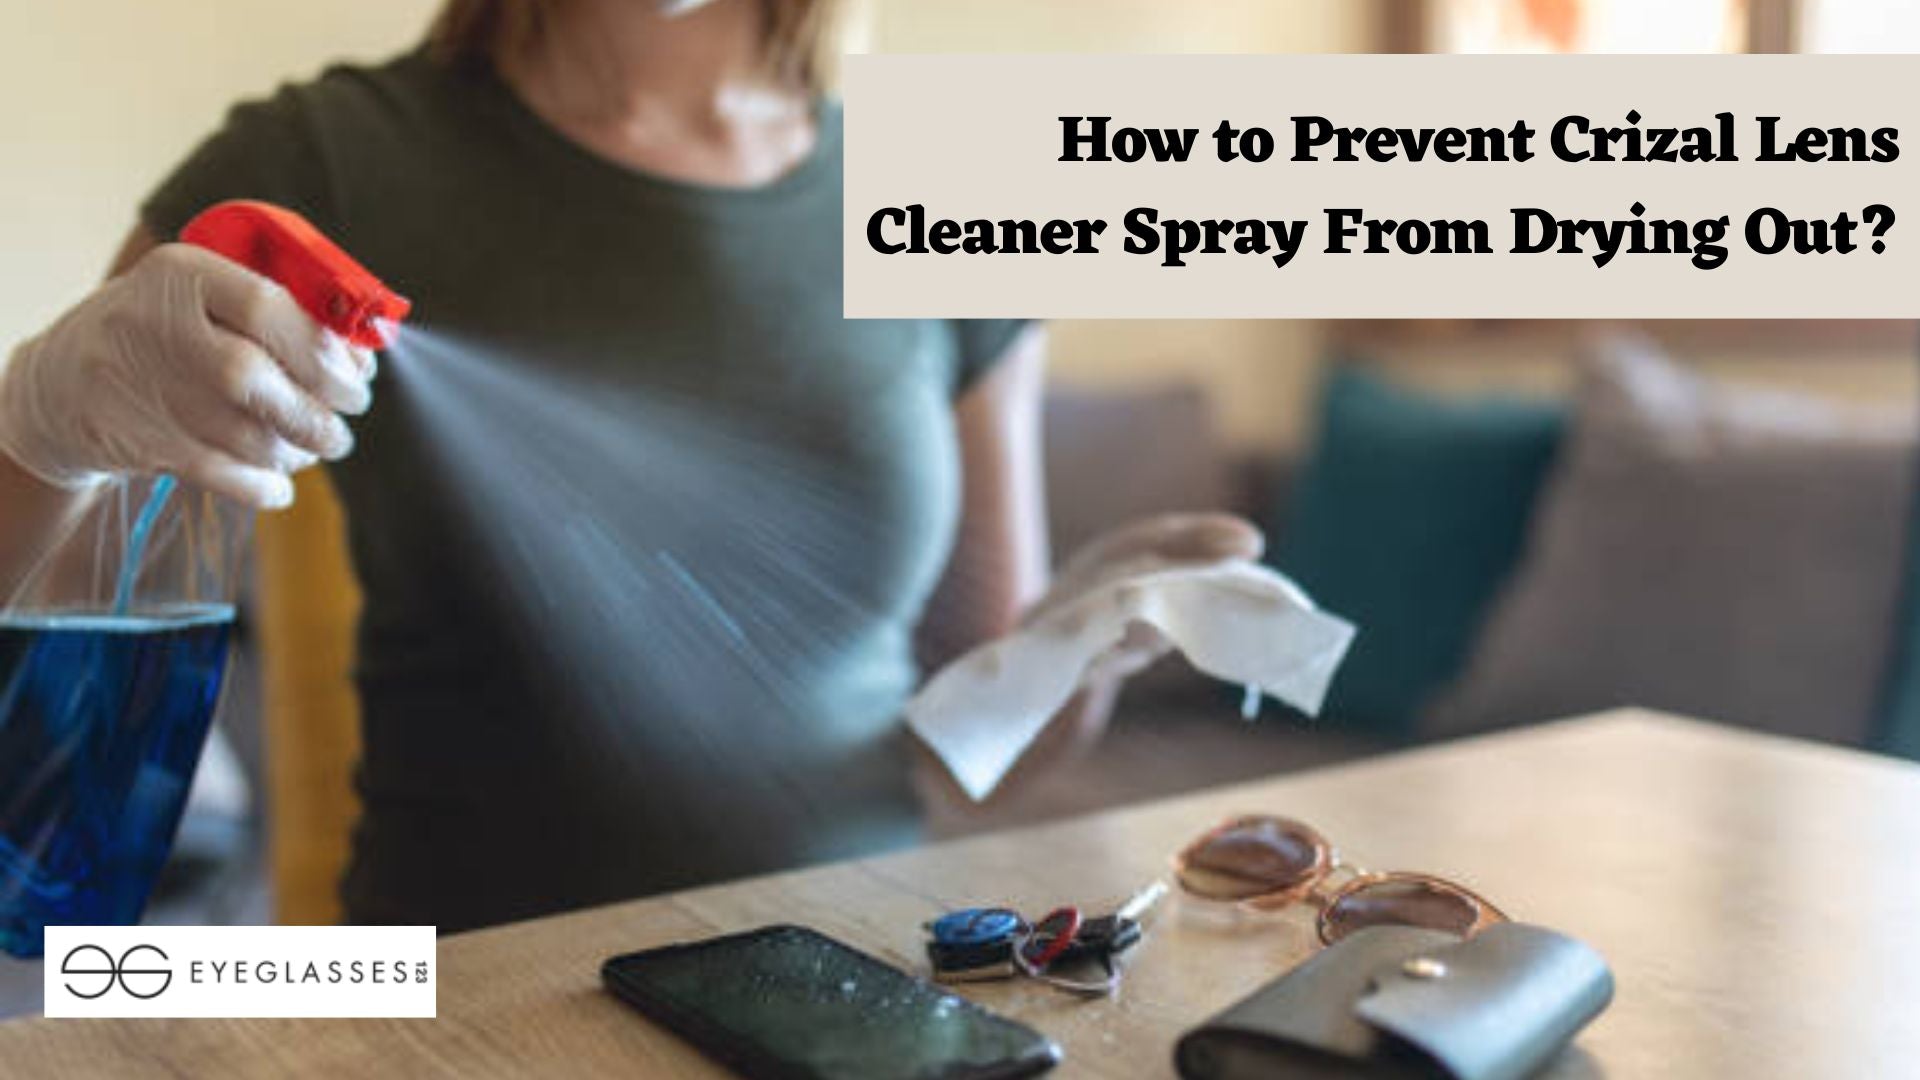 How to Prevent Crizal Lens Cleaner Spray From Drying Out?